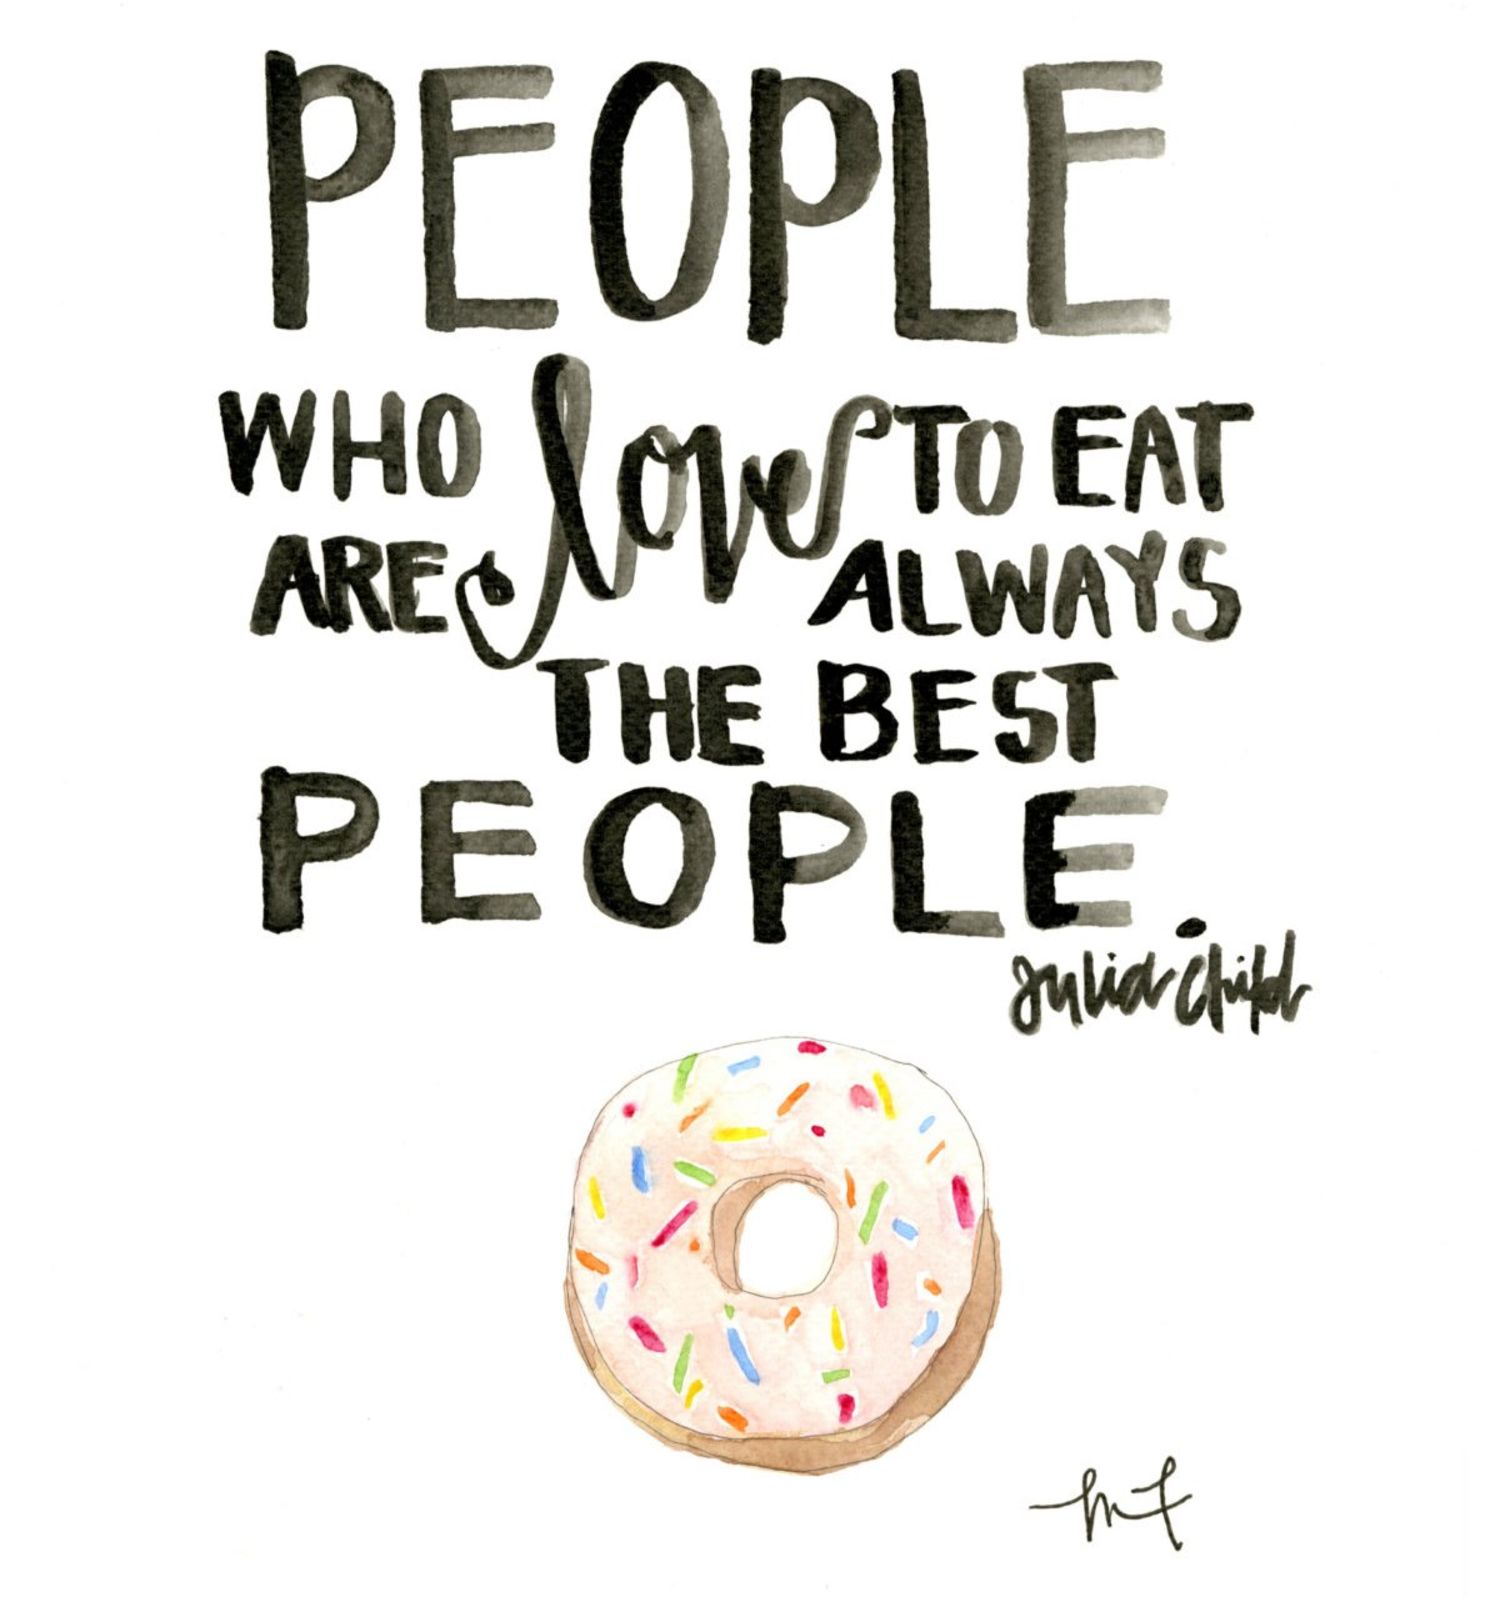 10 Famous Quotes About Food and Cooking to Hang in Your Kitchen | Kitchn